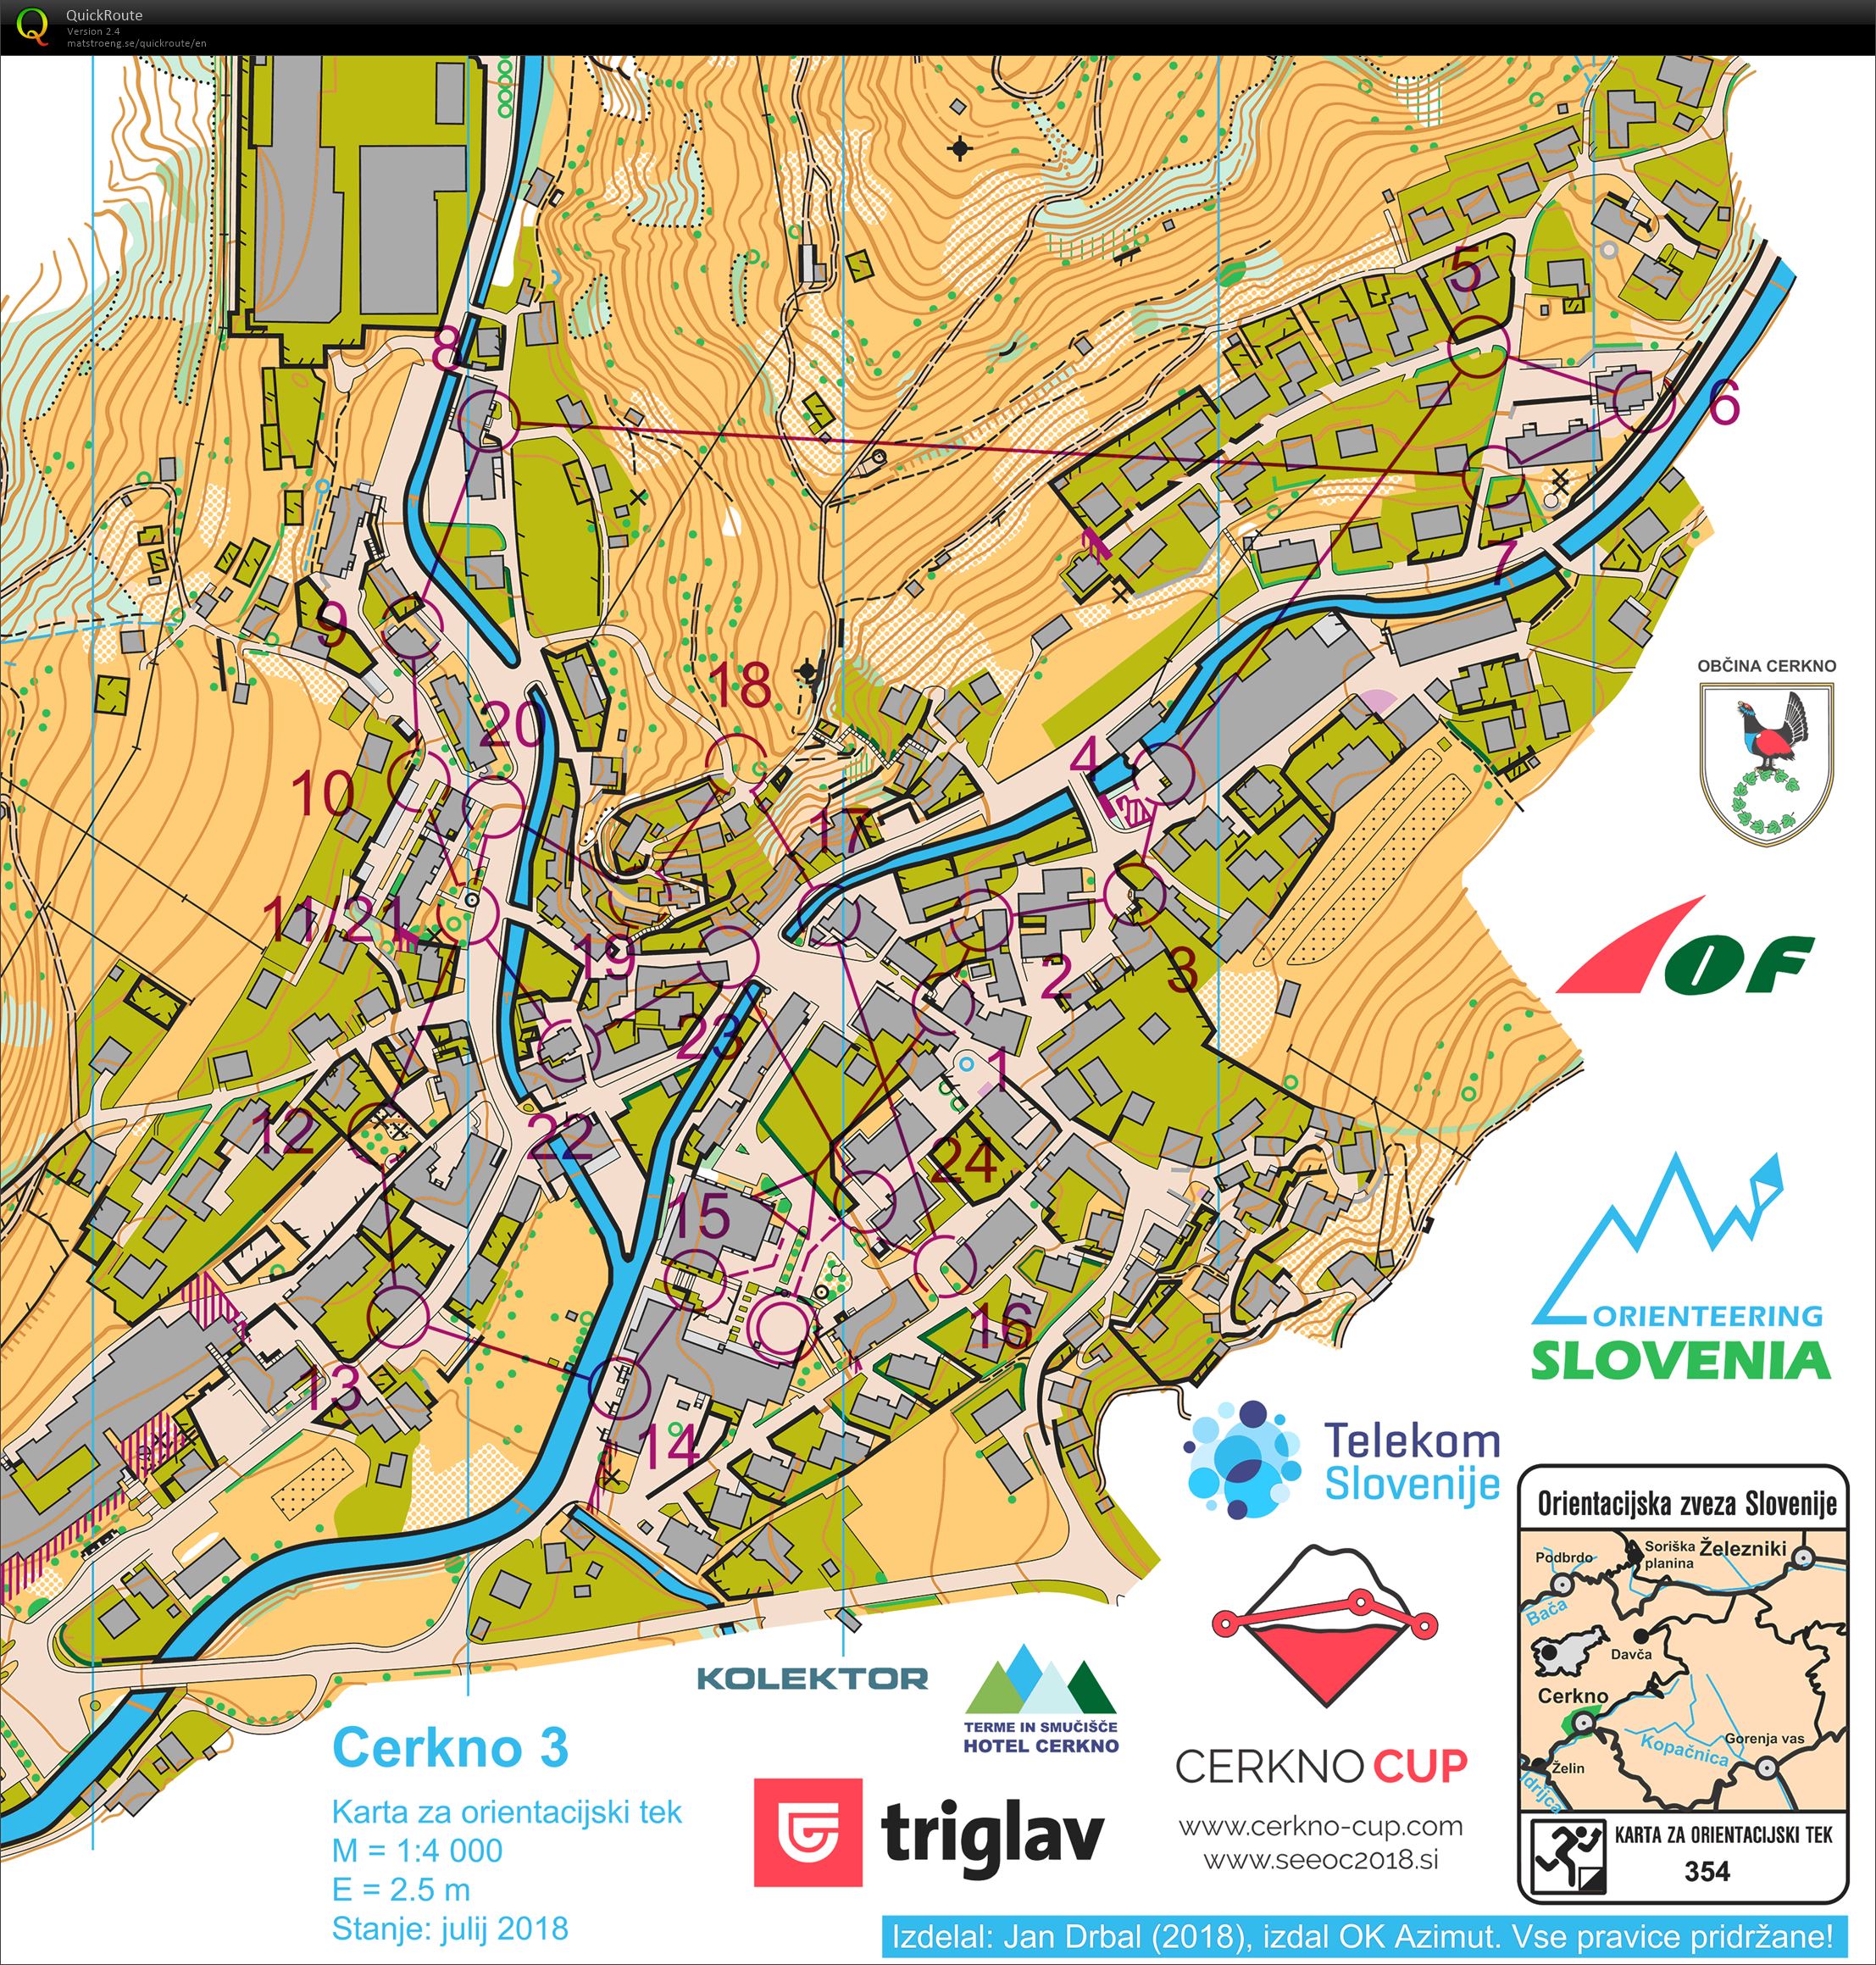 Cerkno Cup Stage 4 (25/08/2018)